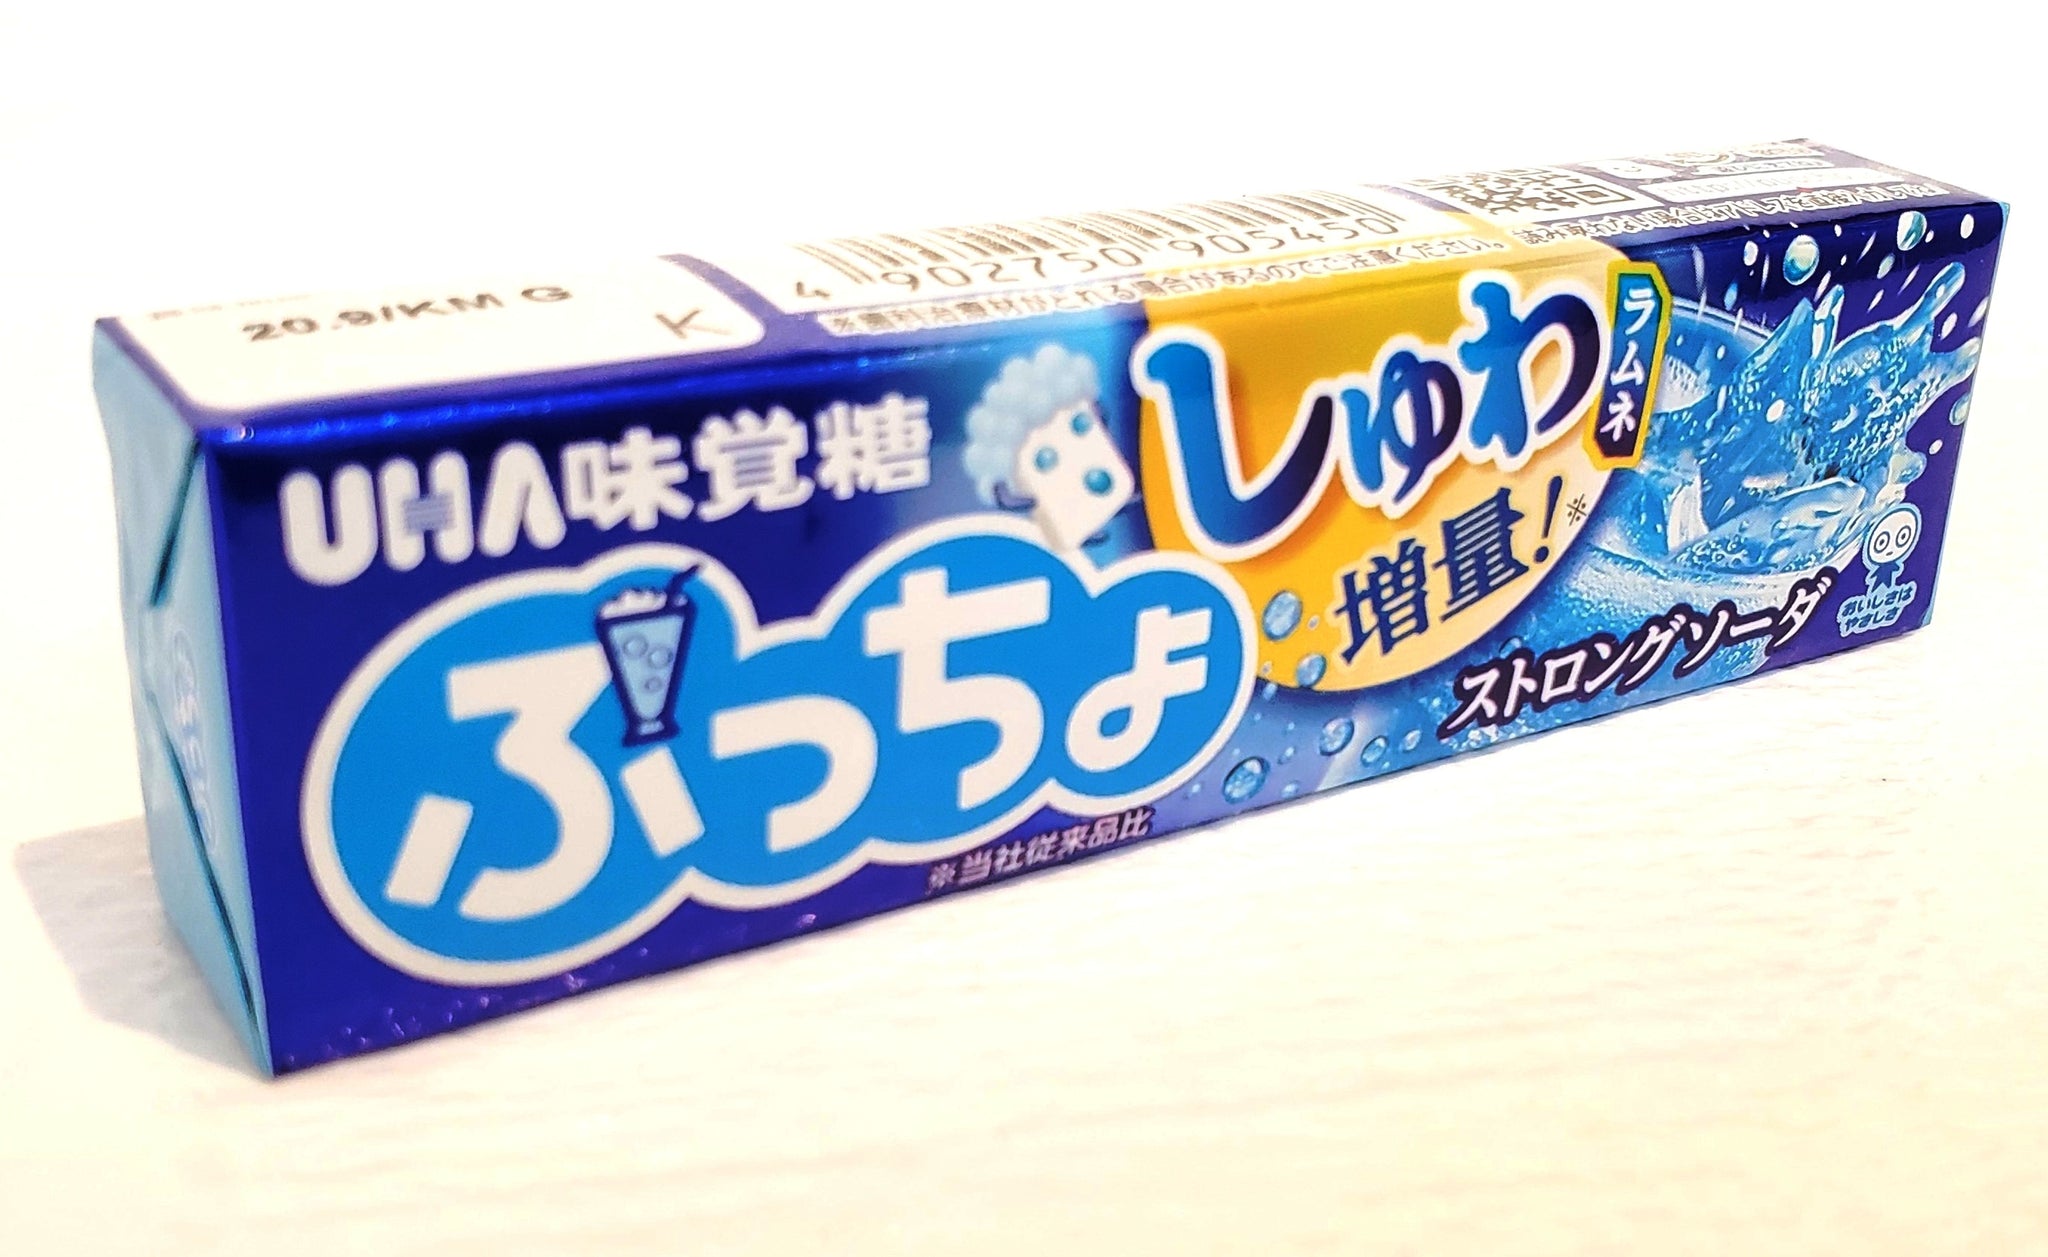 UHA puccho ramune soda chewy candy